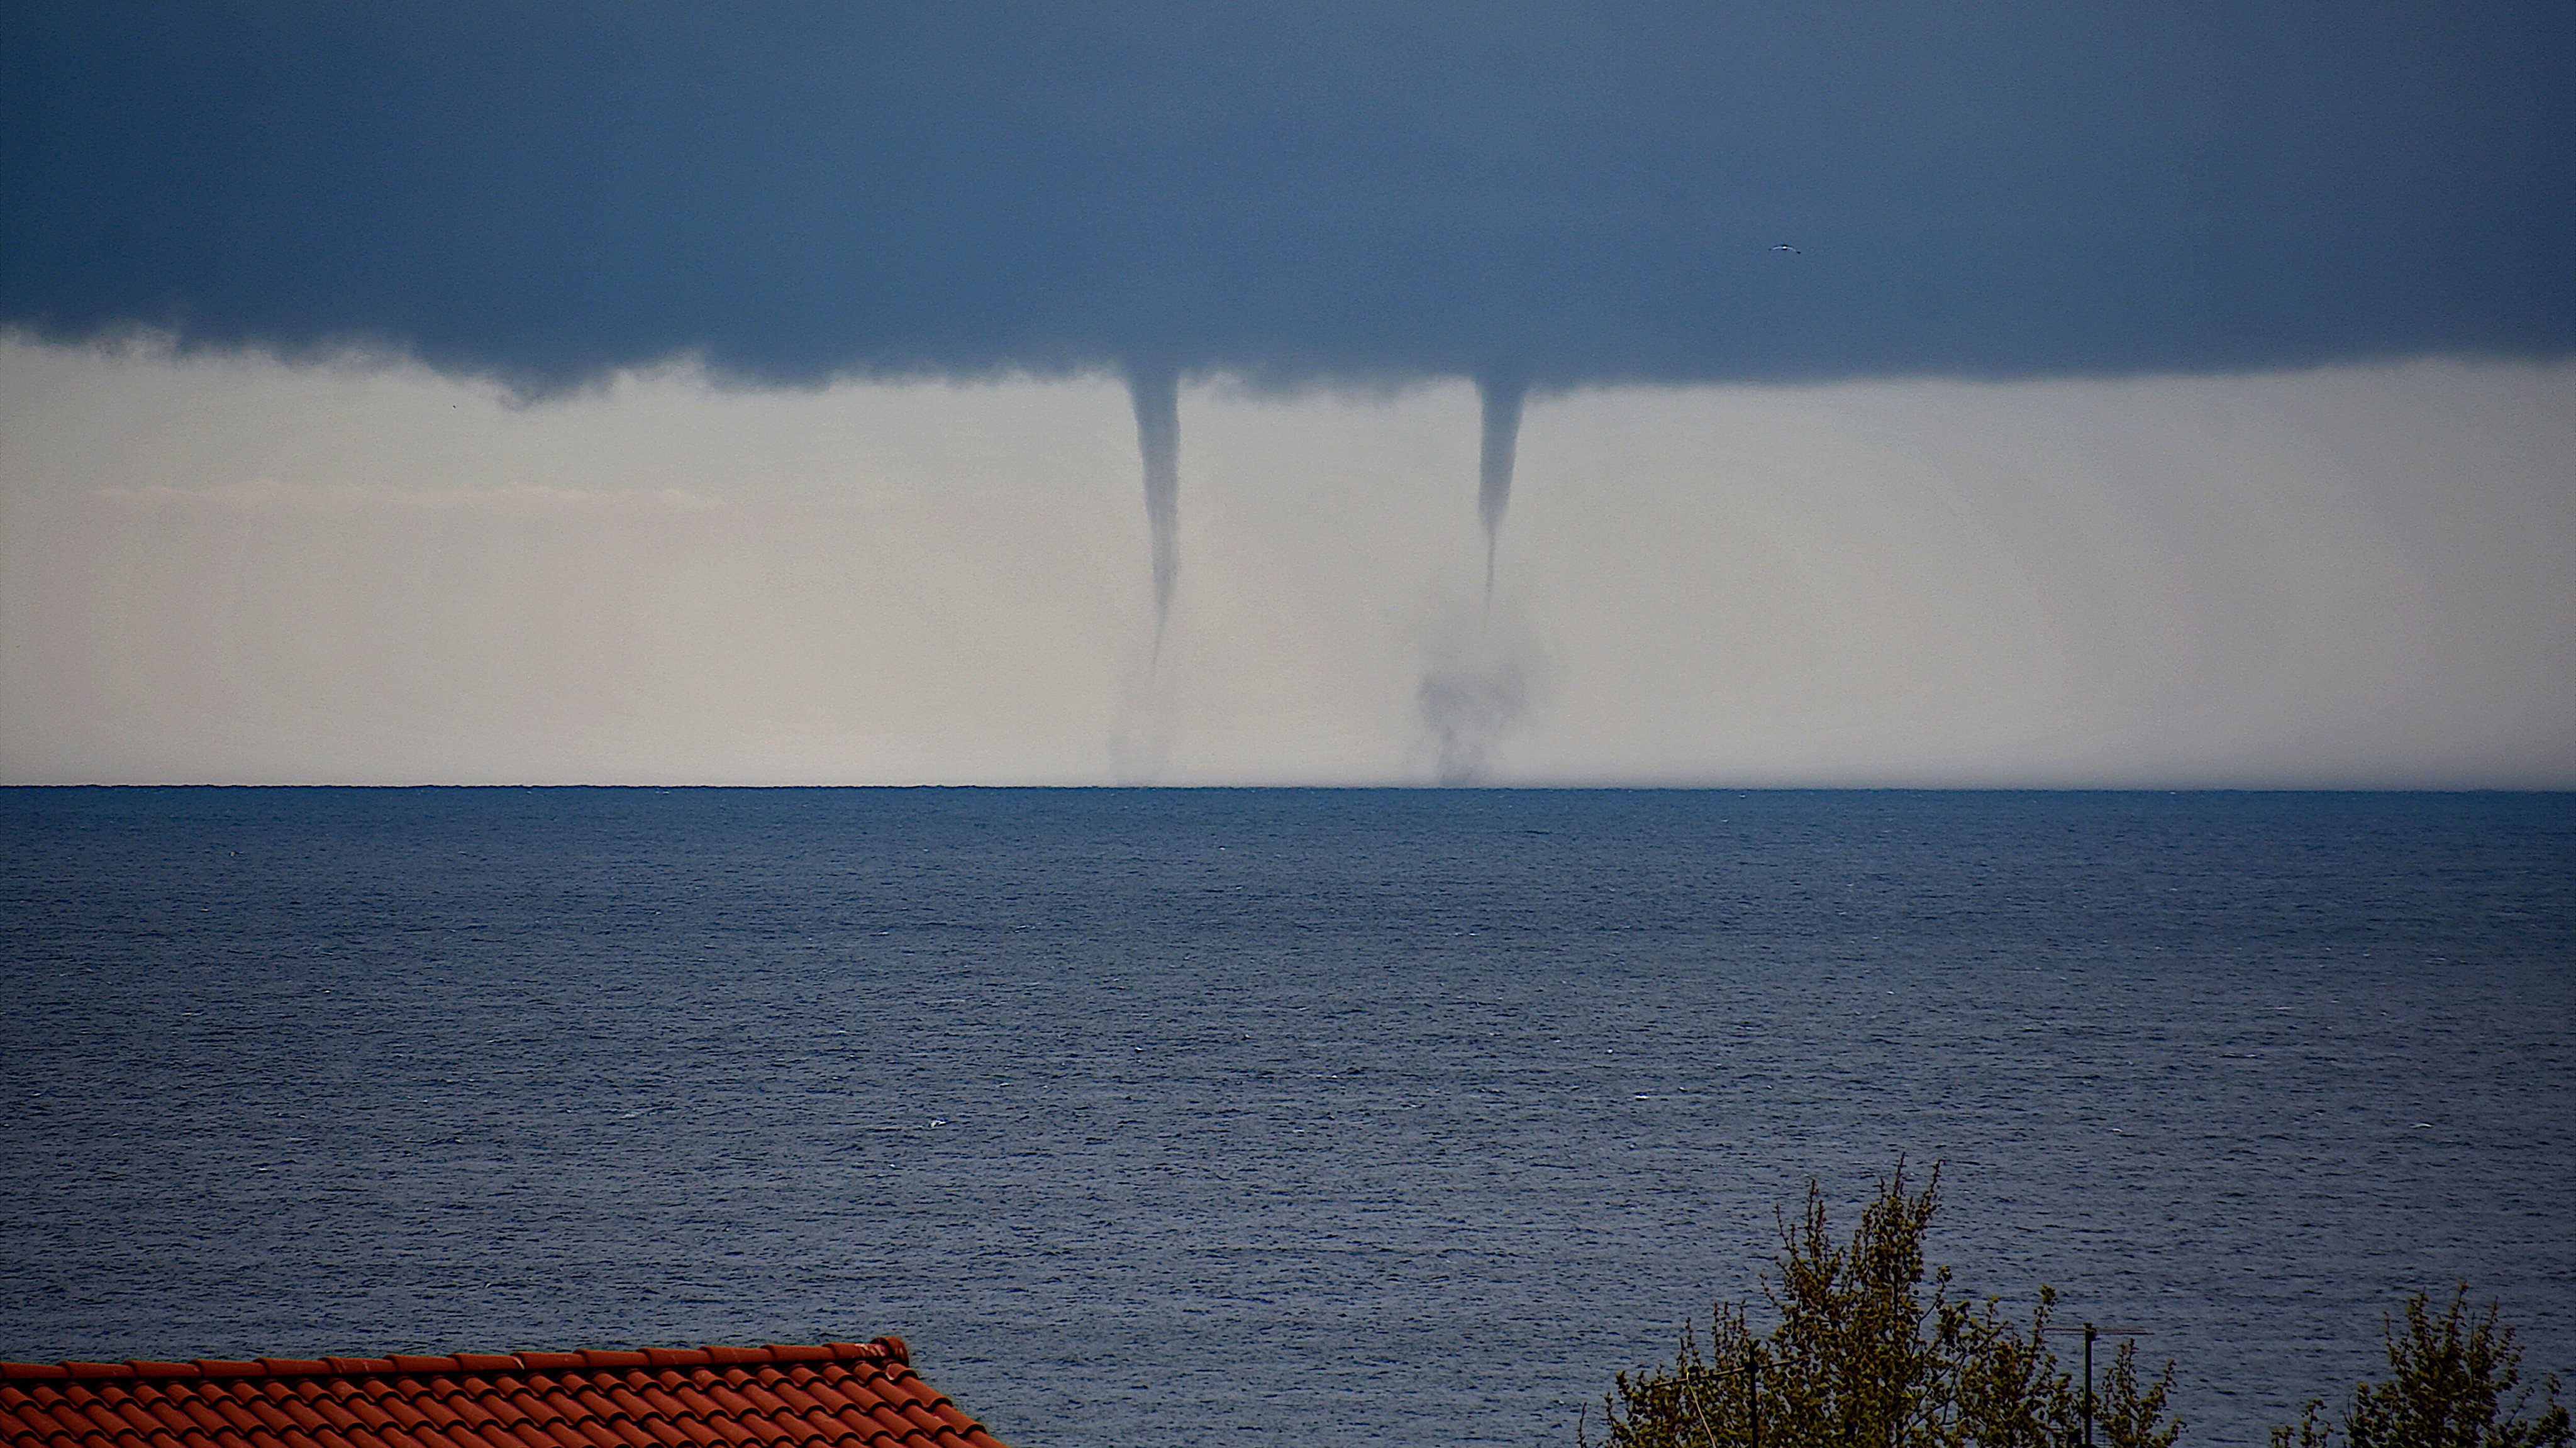 Tornadic waterspouts are seen on the sea off Marseille